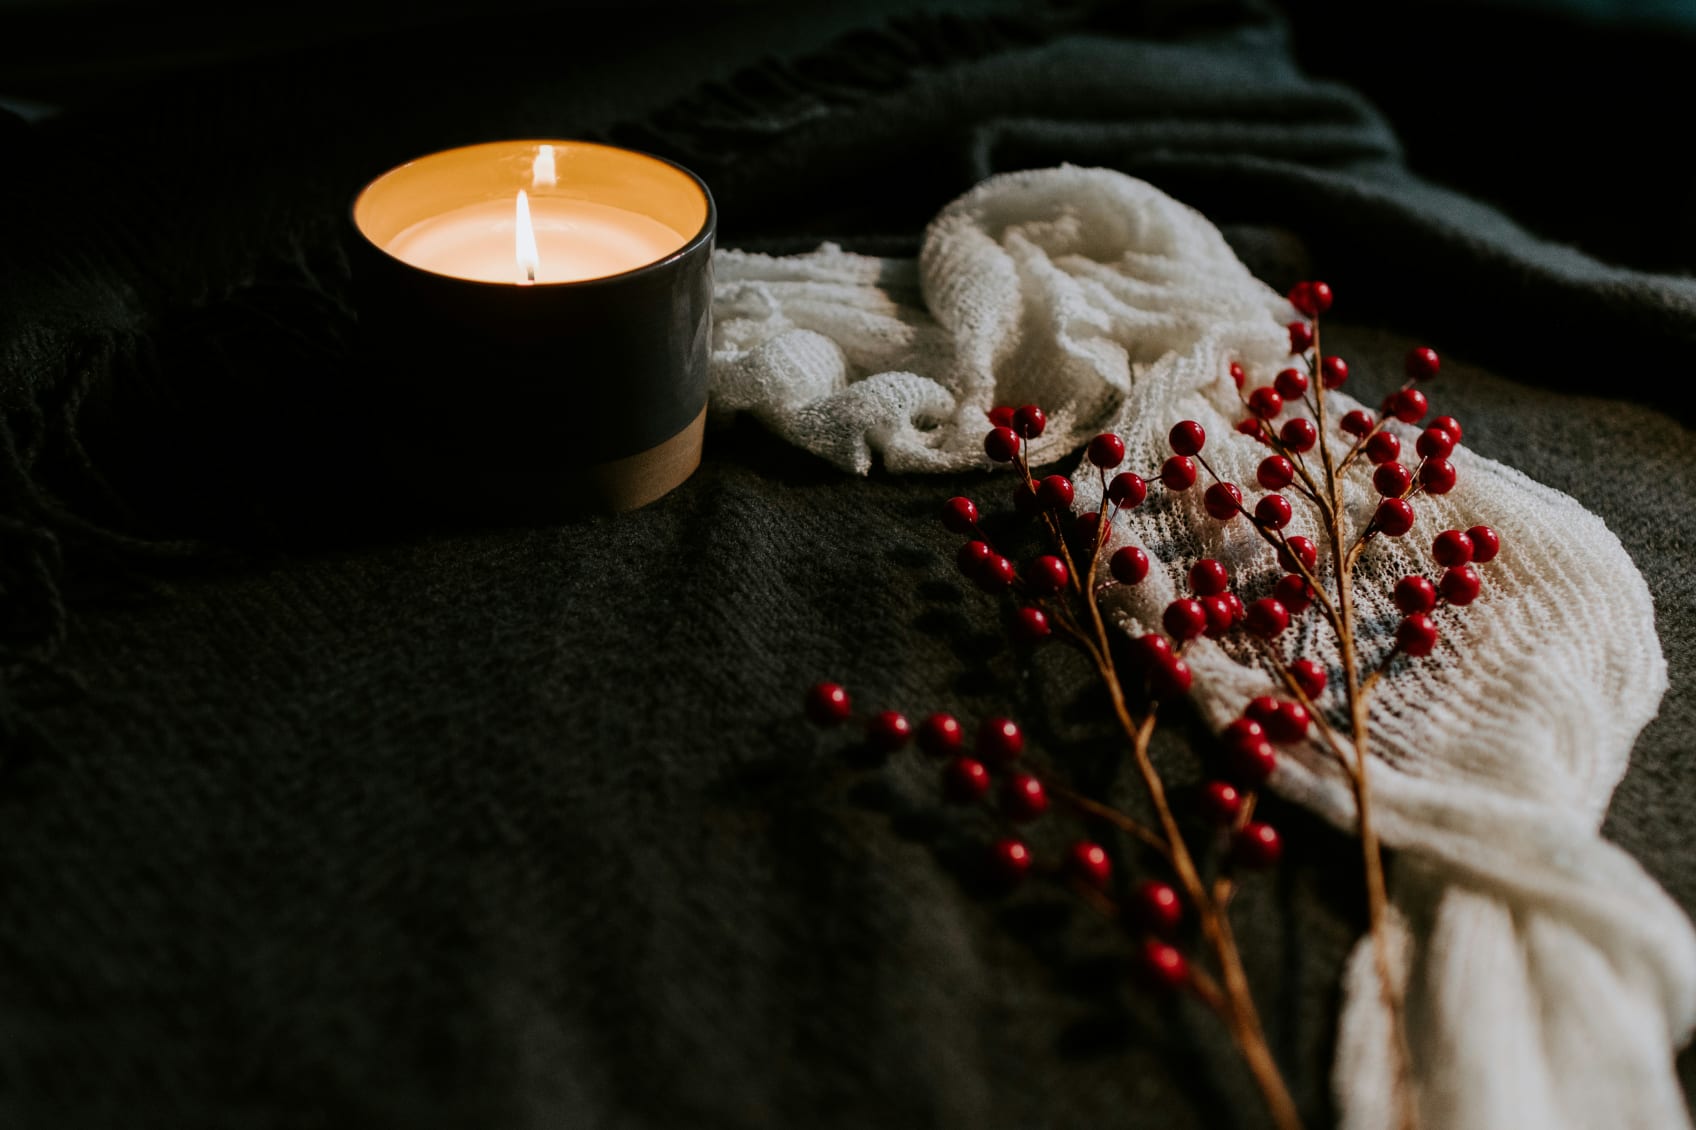 A candle with berries and a cloth